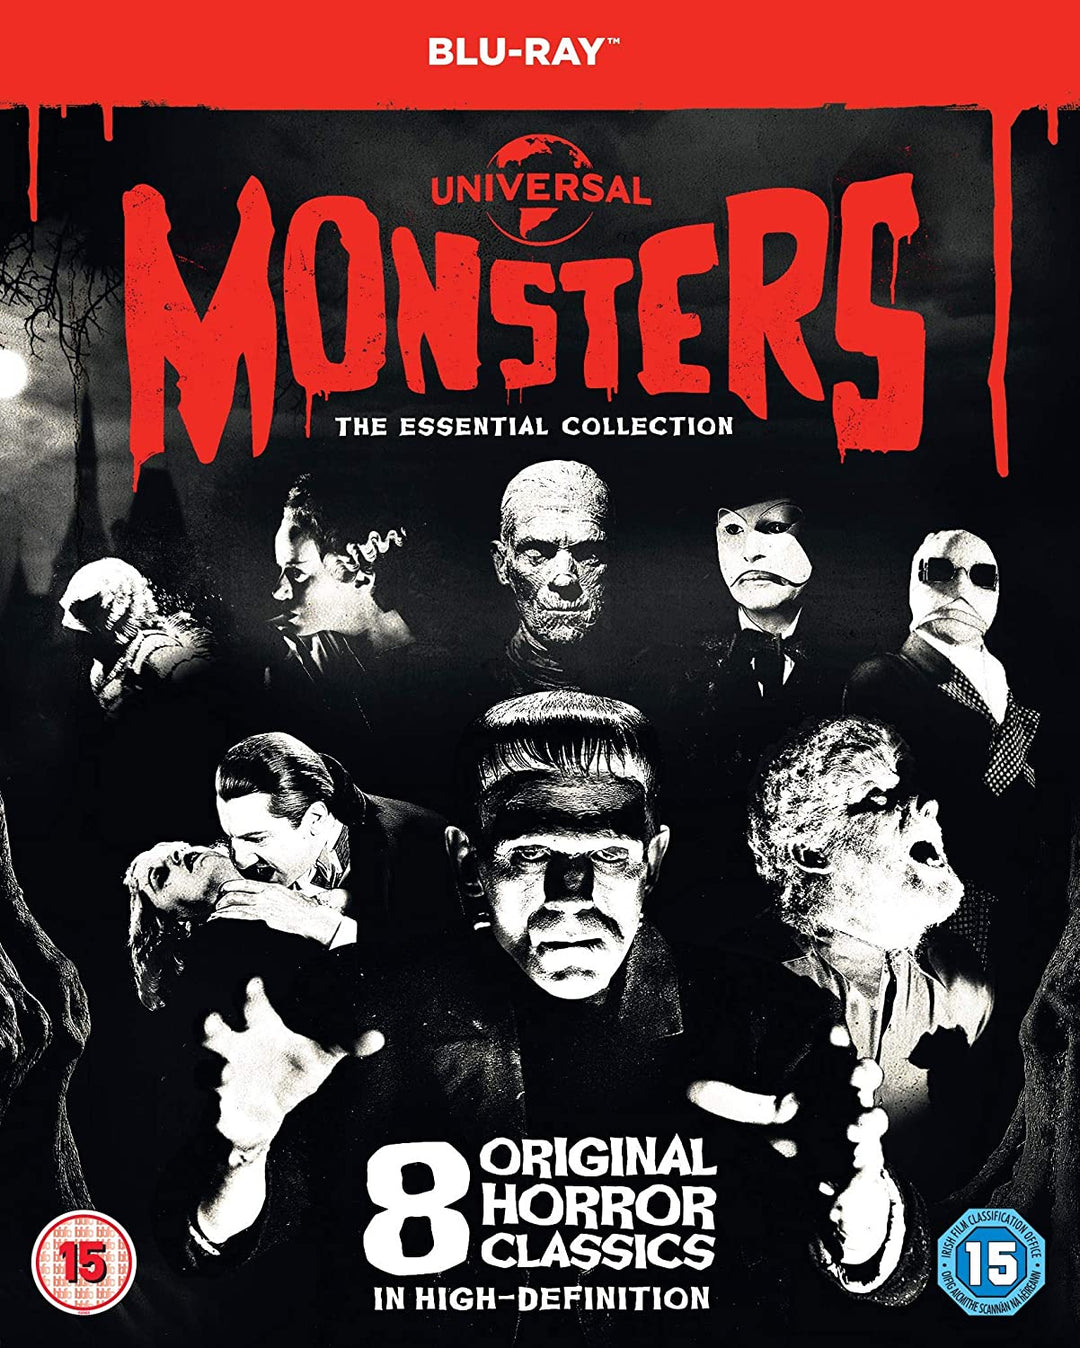 Universal Classic Monsters - The Essential Collection [Blu-ray]